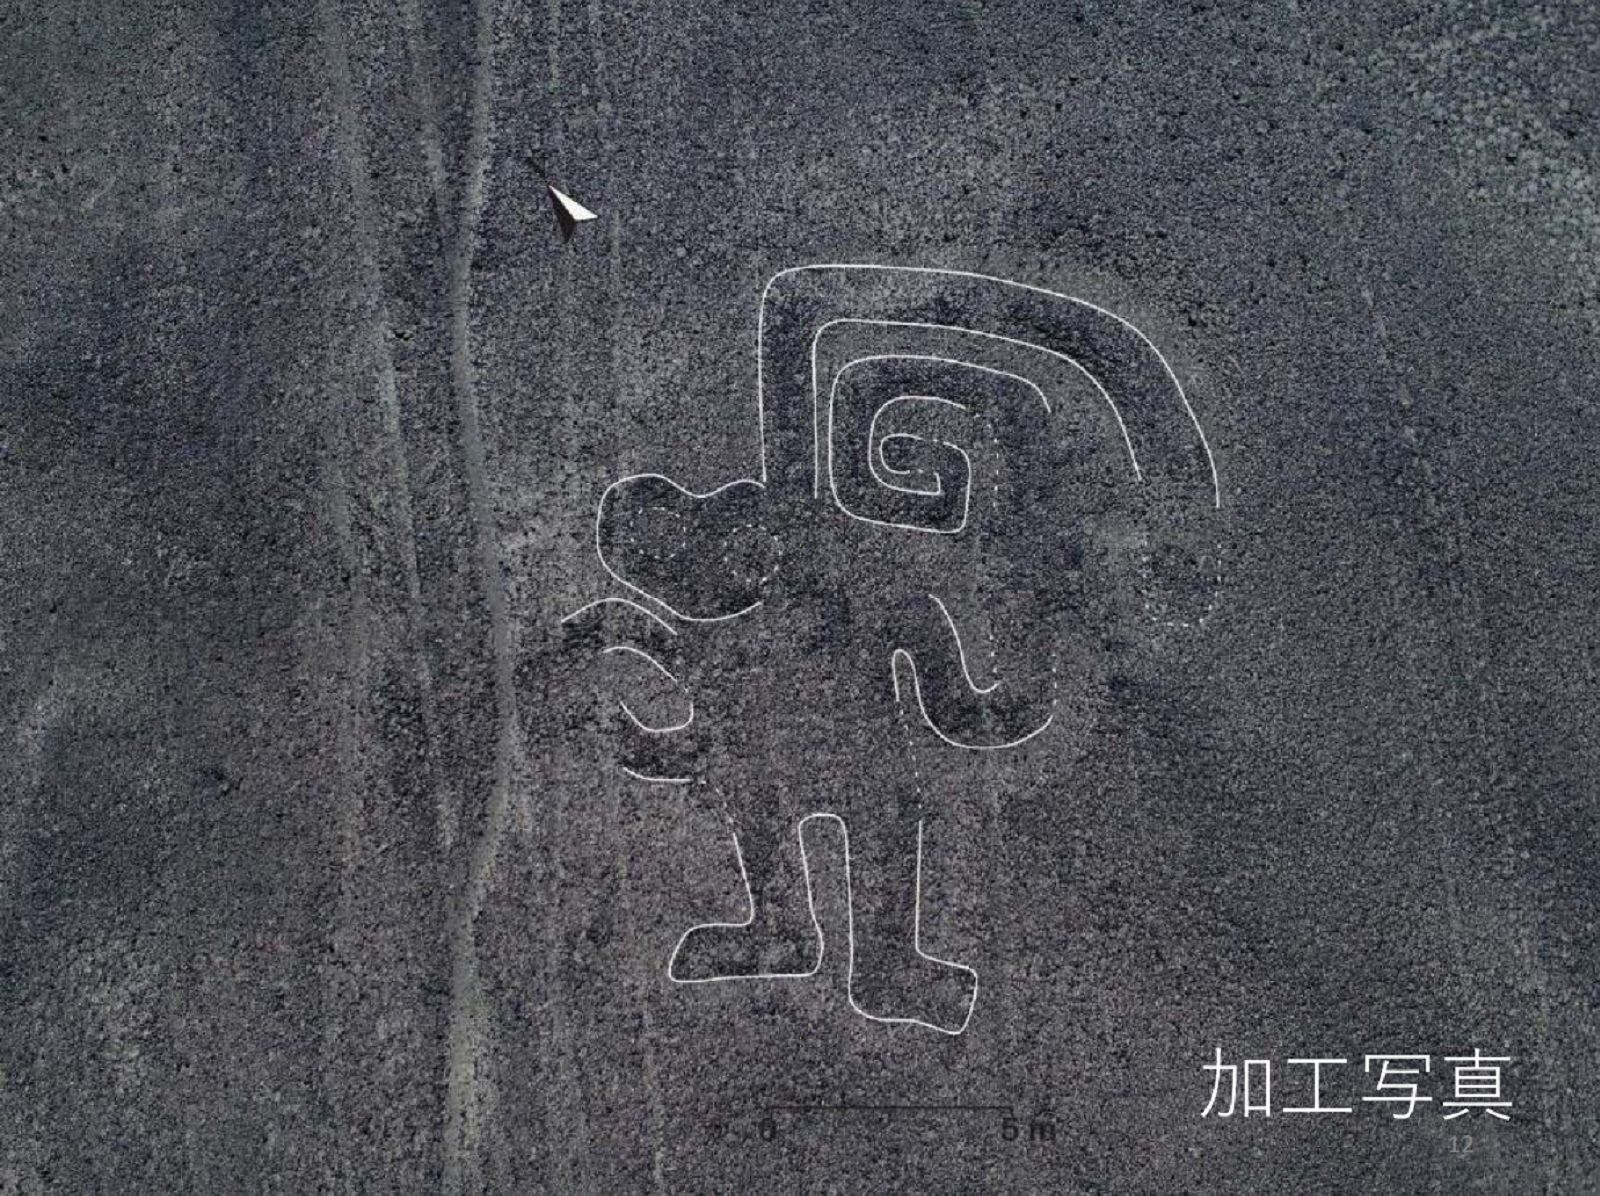 Scientists use IBM AI to discover mysterious drawings in Peru image 14